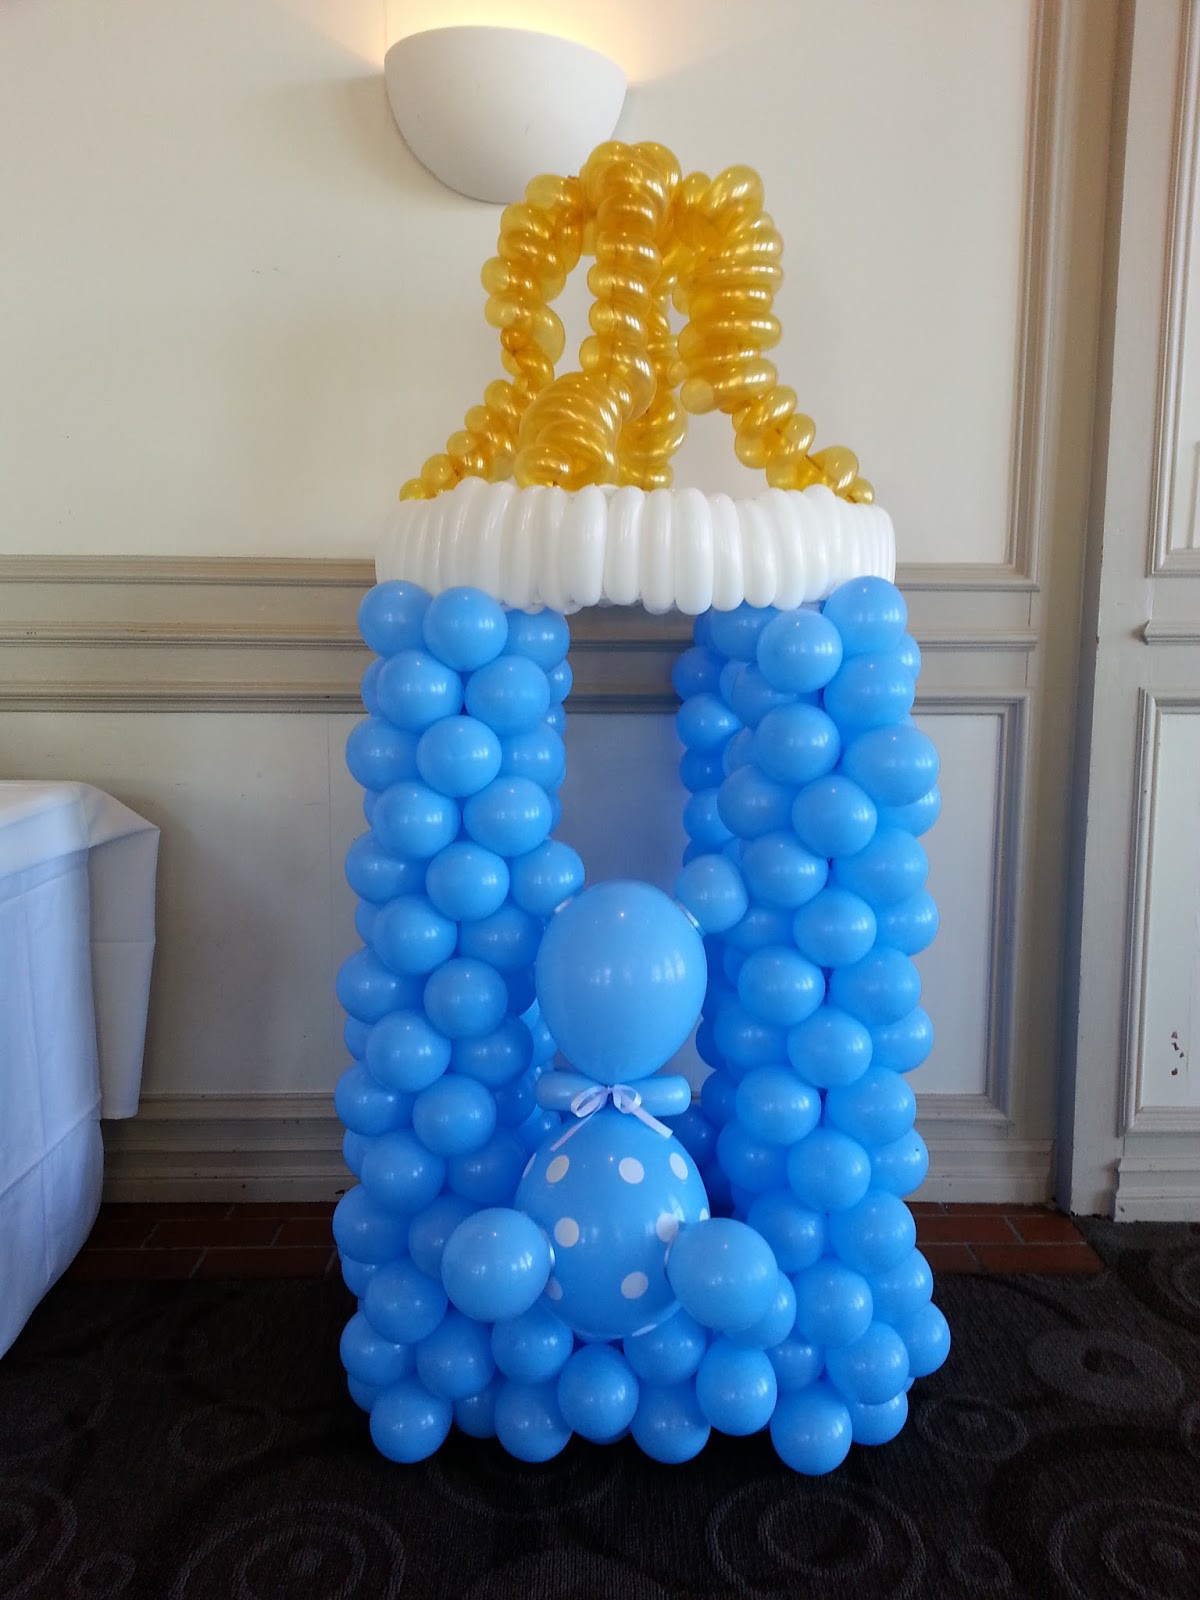 Baby Shower Decorations Ideas For A Boy
 PoP Balloons A baby shower for a boy